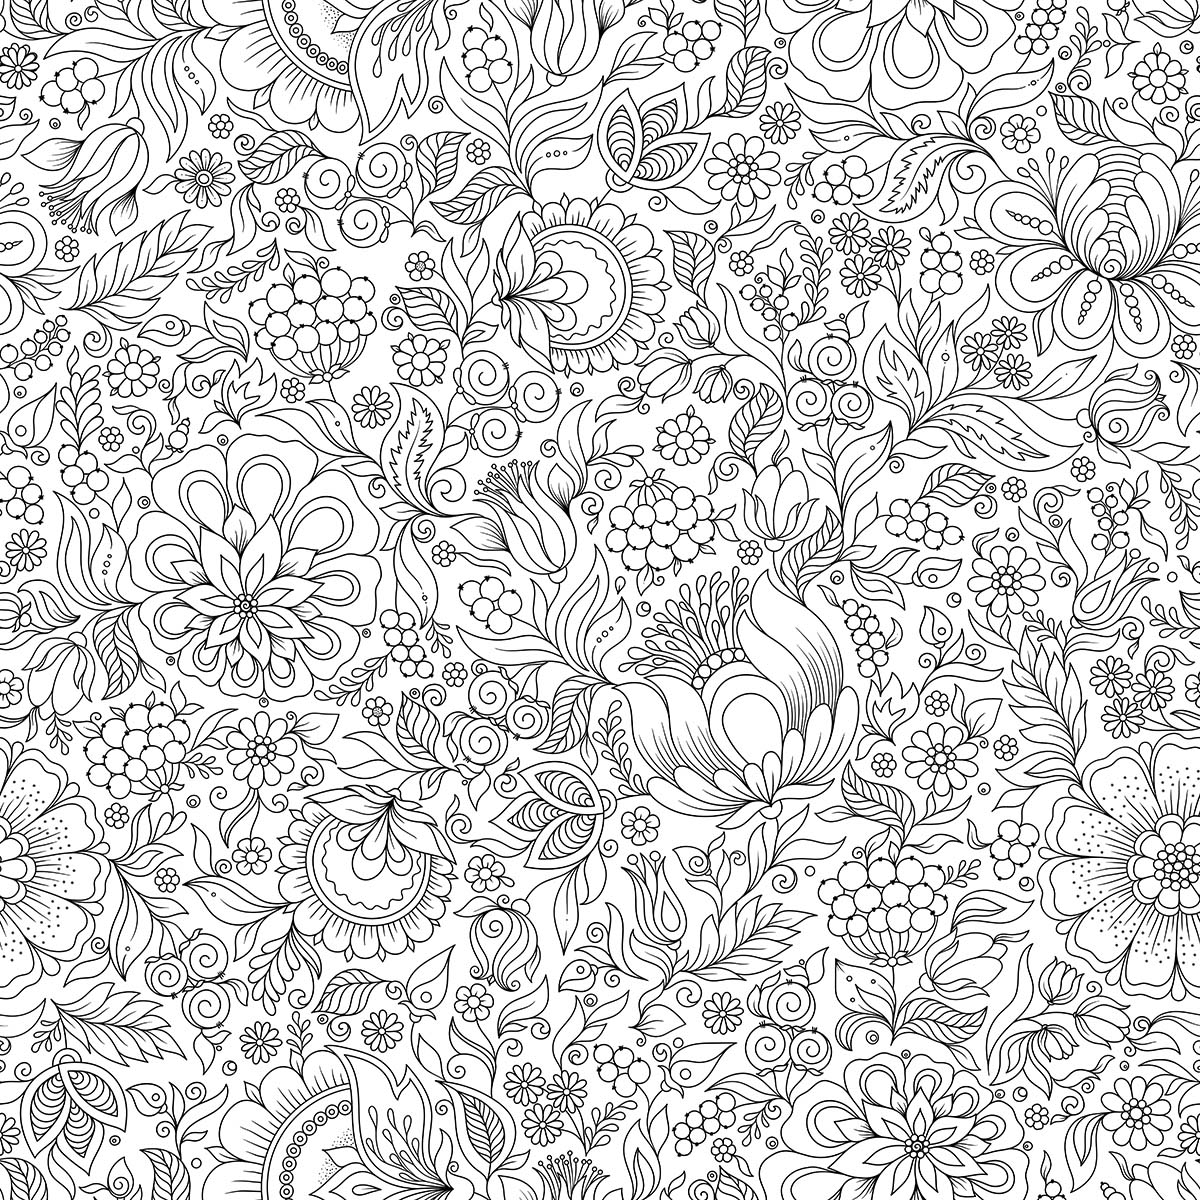 A black and white pattern of flowers